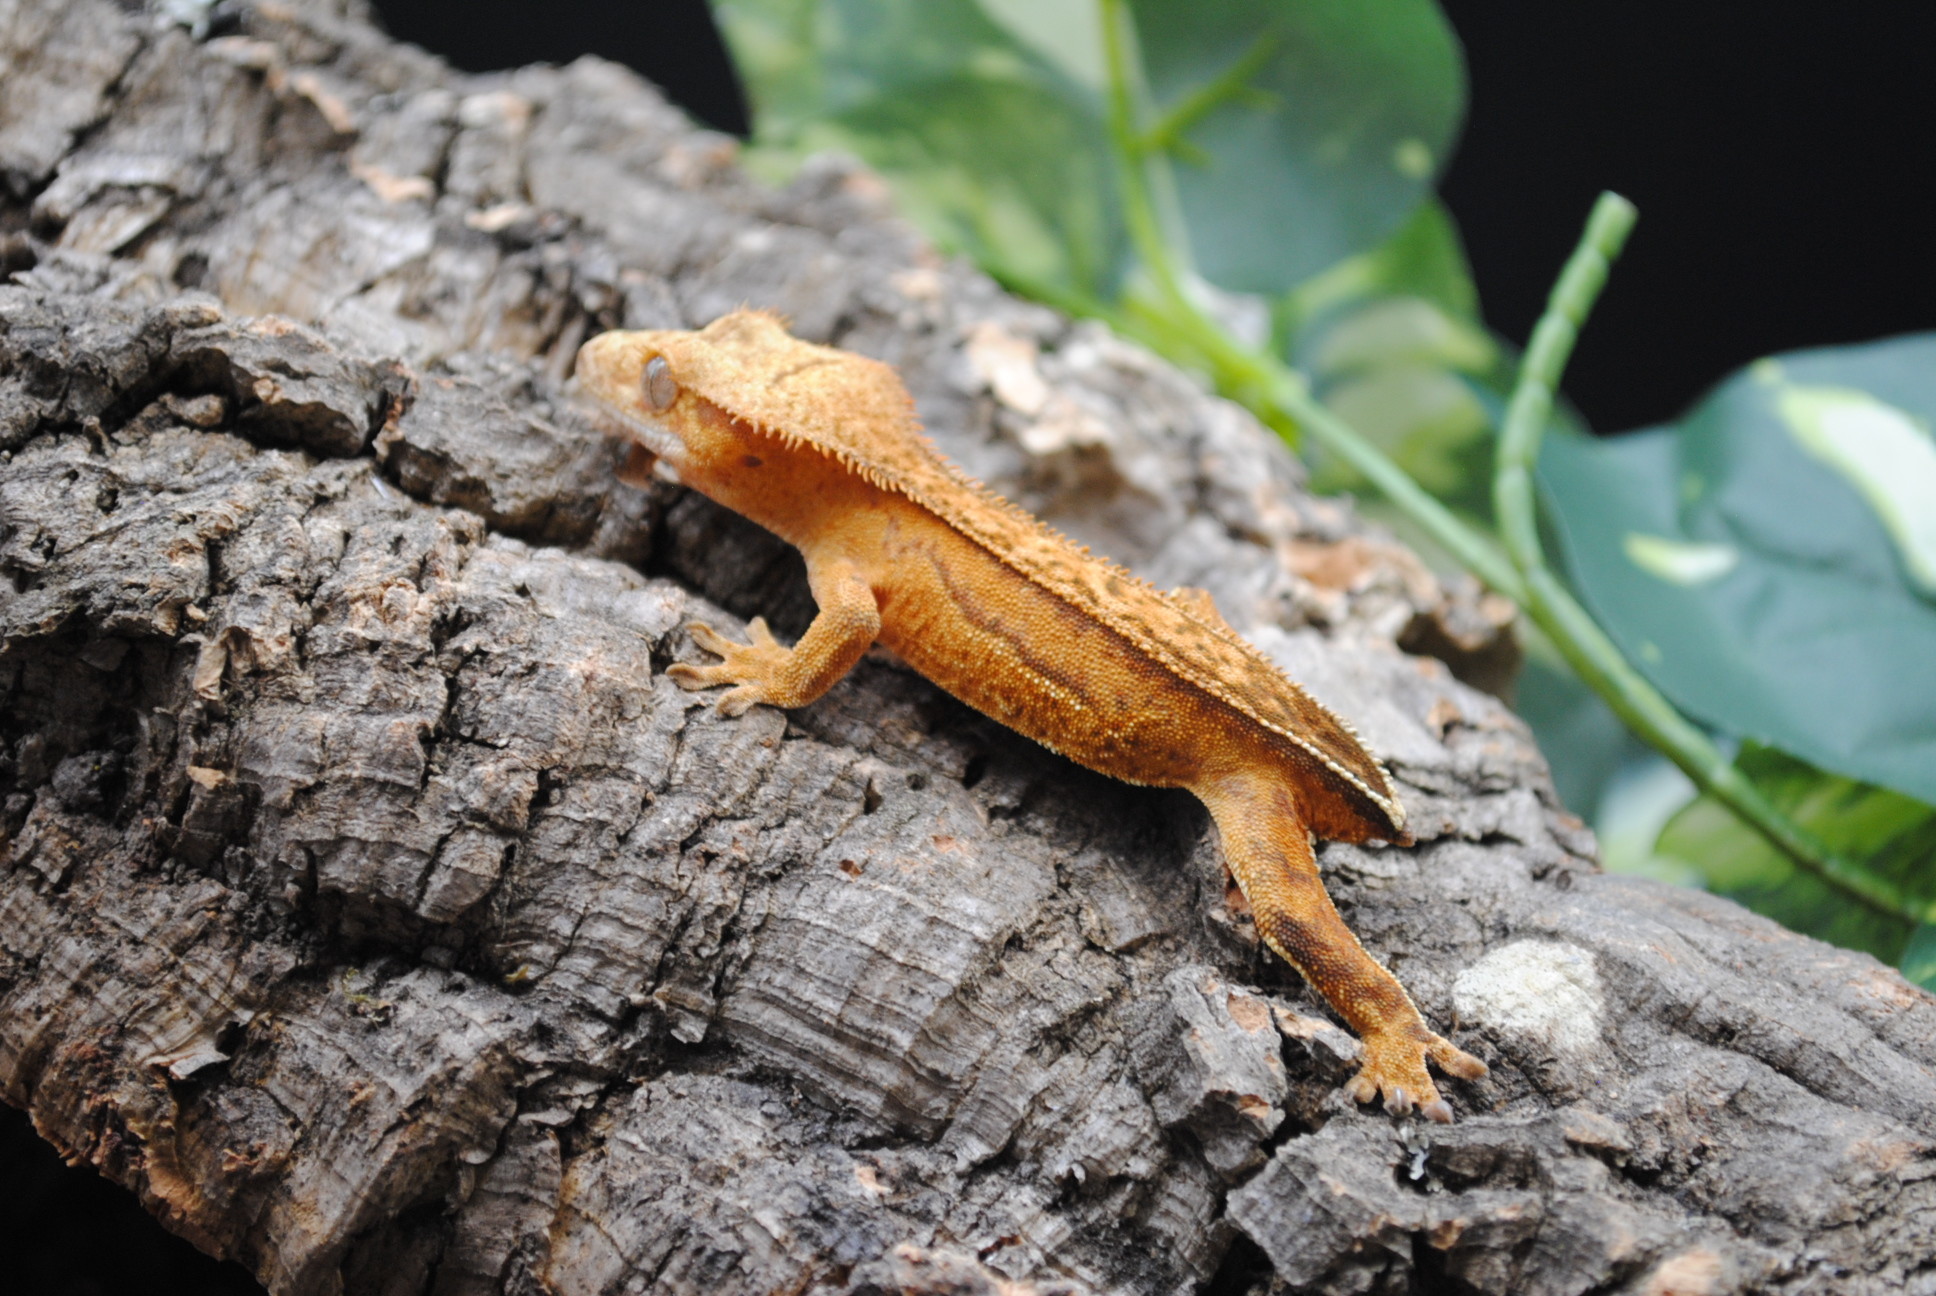 Orange Crested Gecko by Tipsy Scales